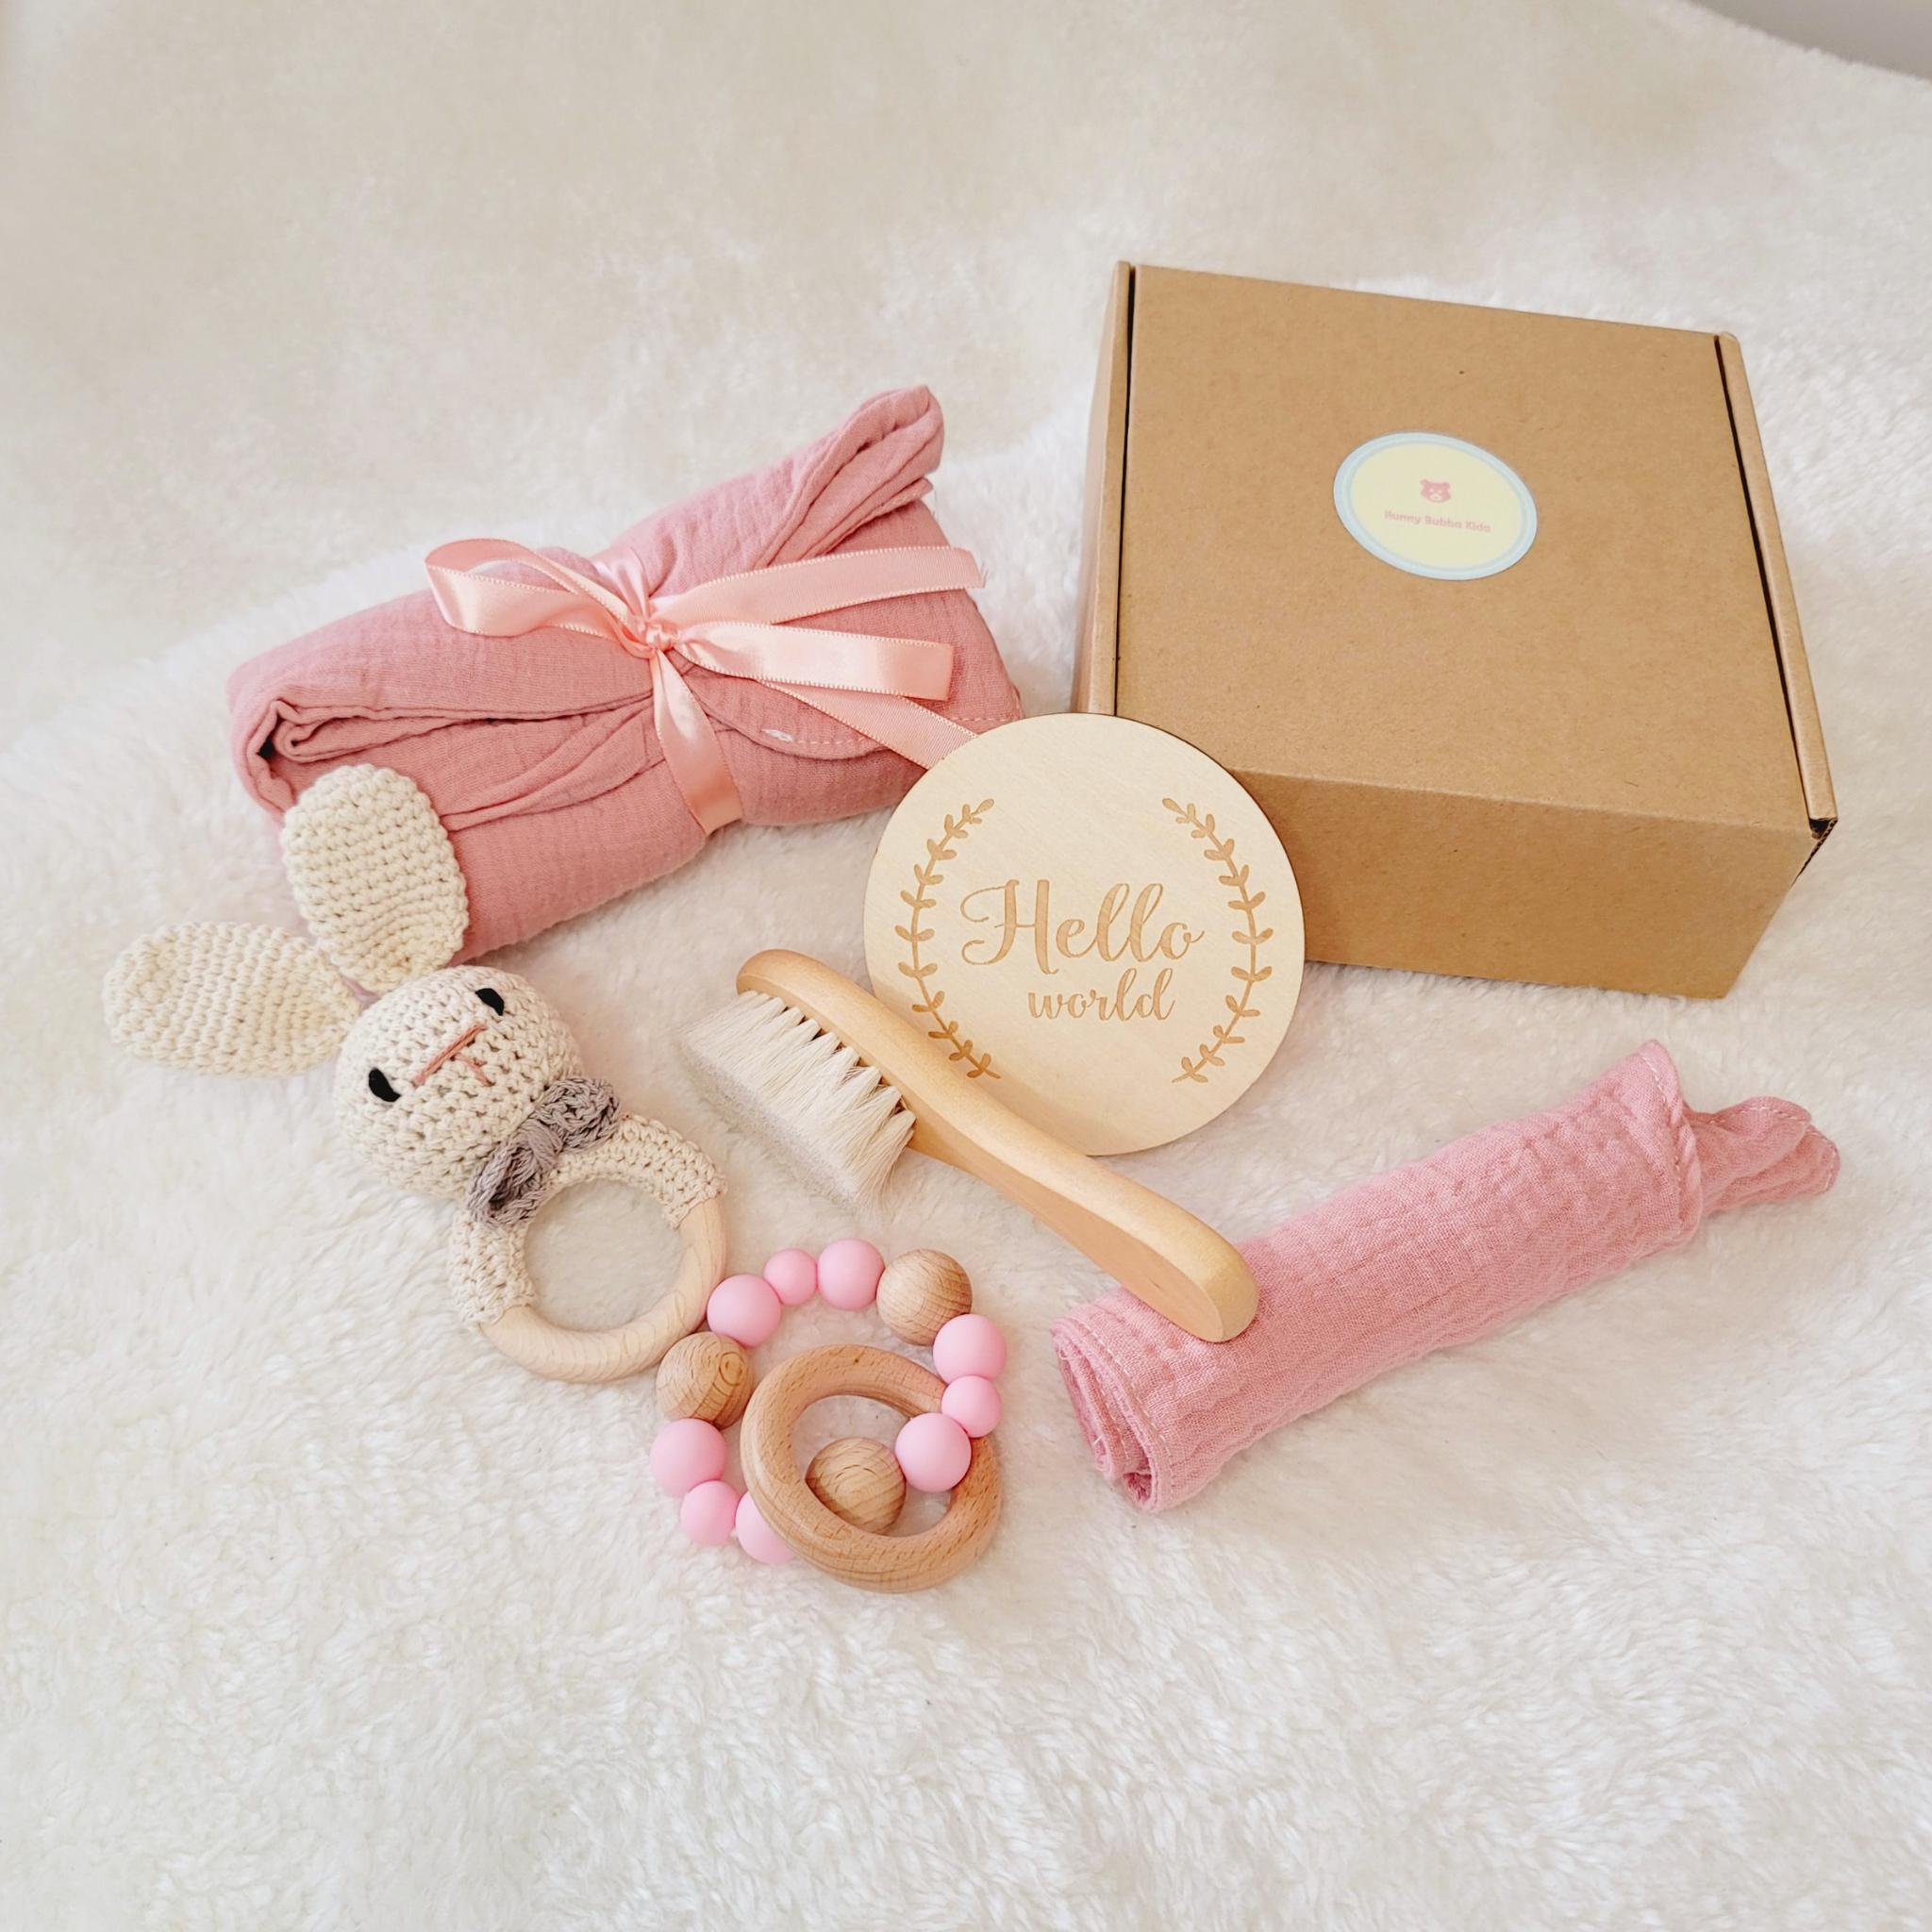 Baby Gifts & Presents Ideas | John Lewis & Partners